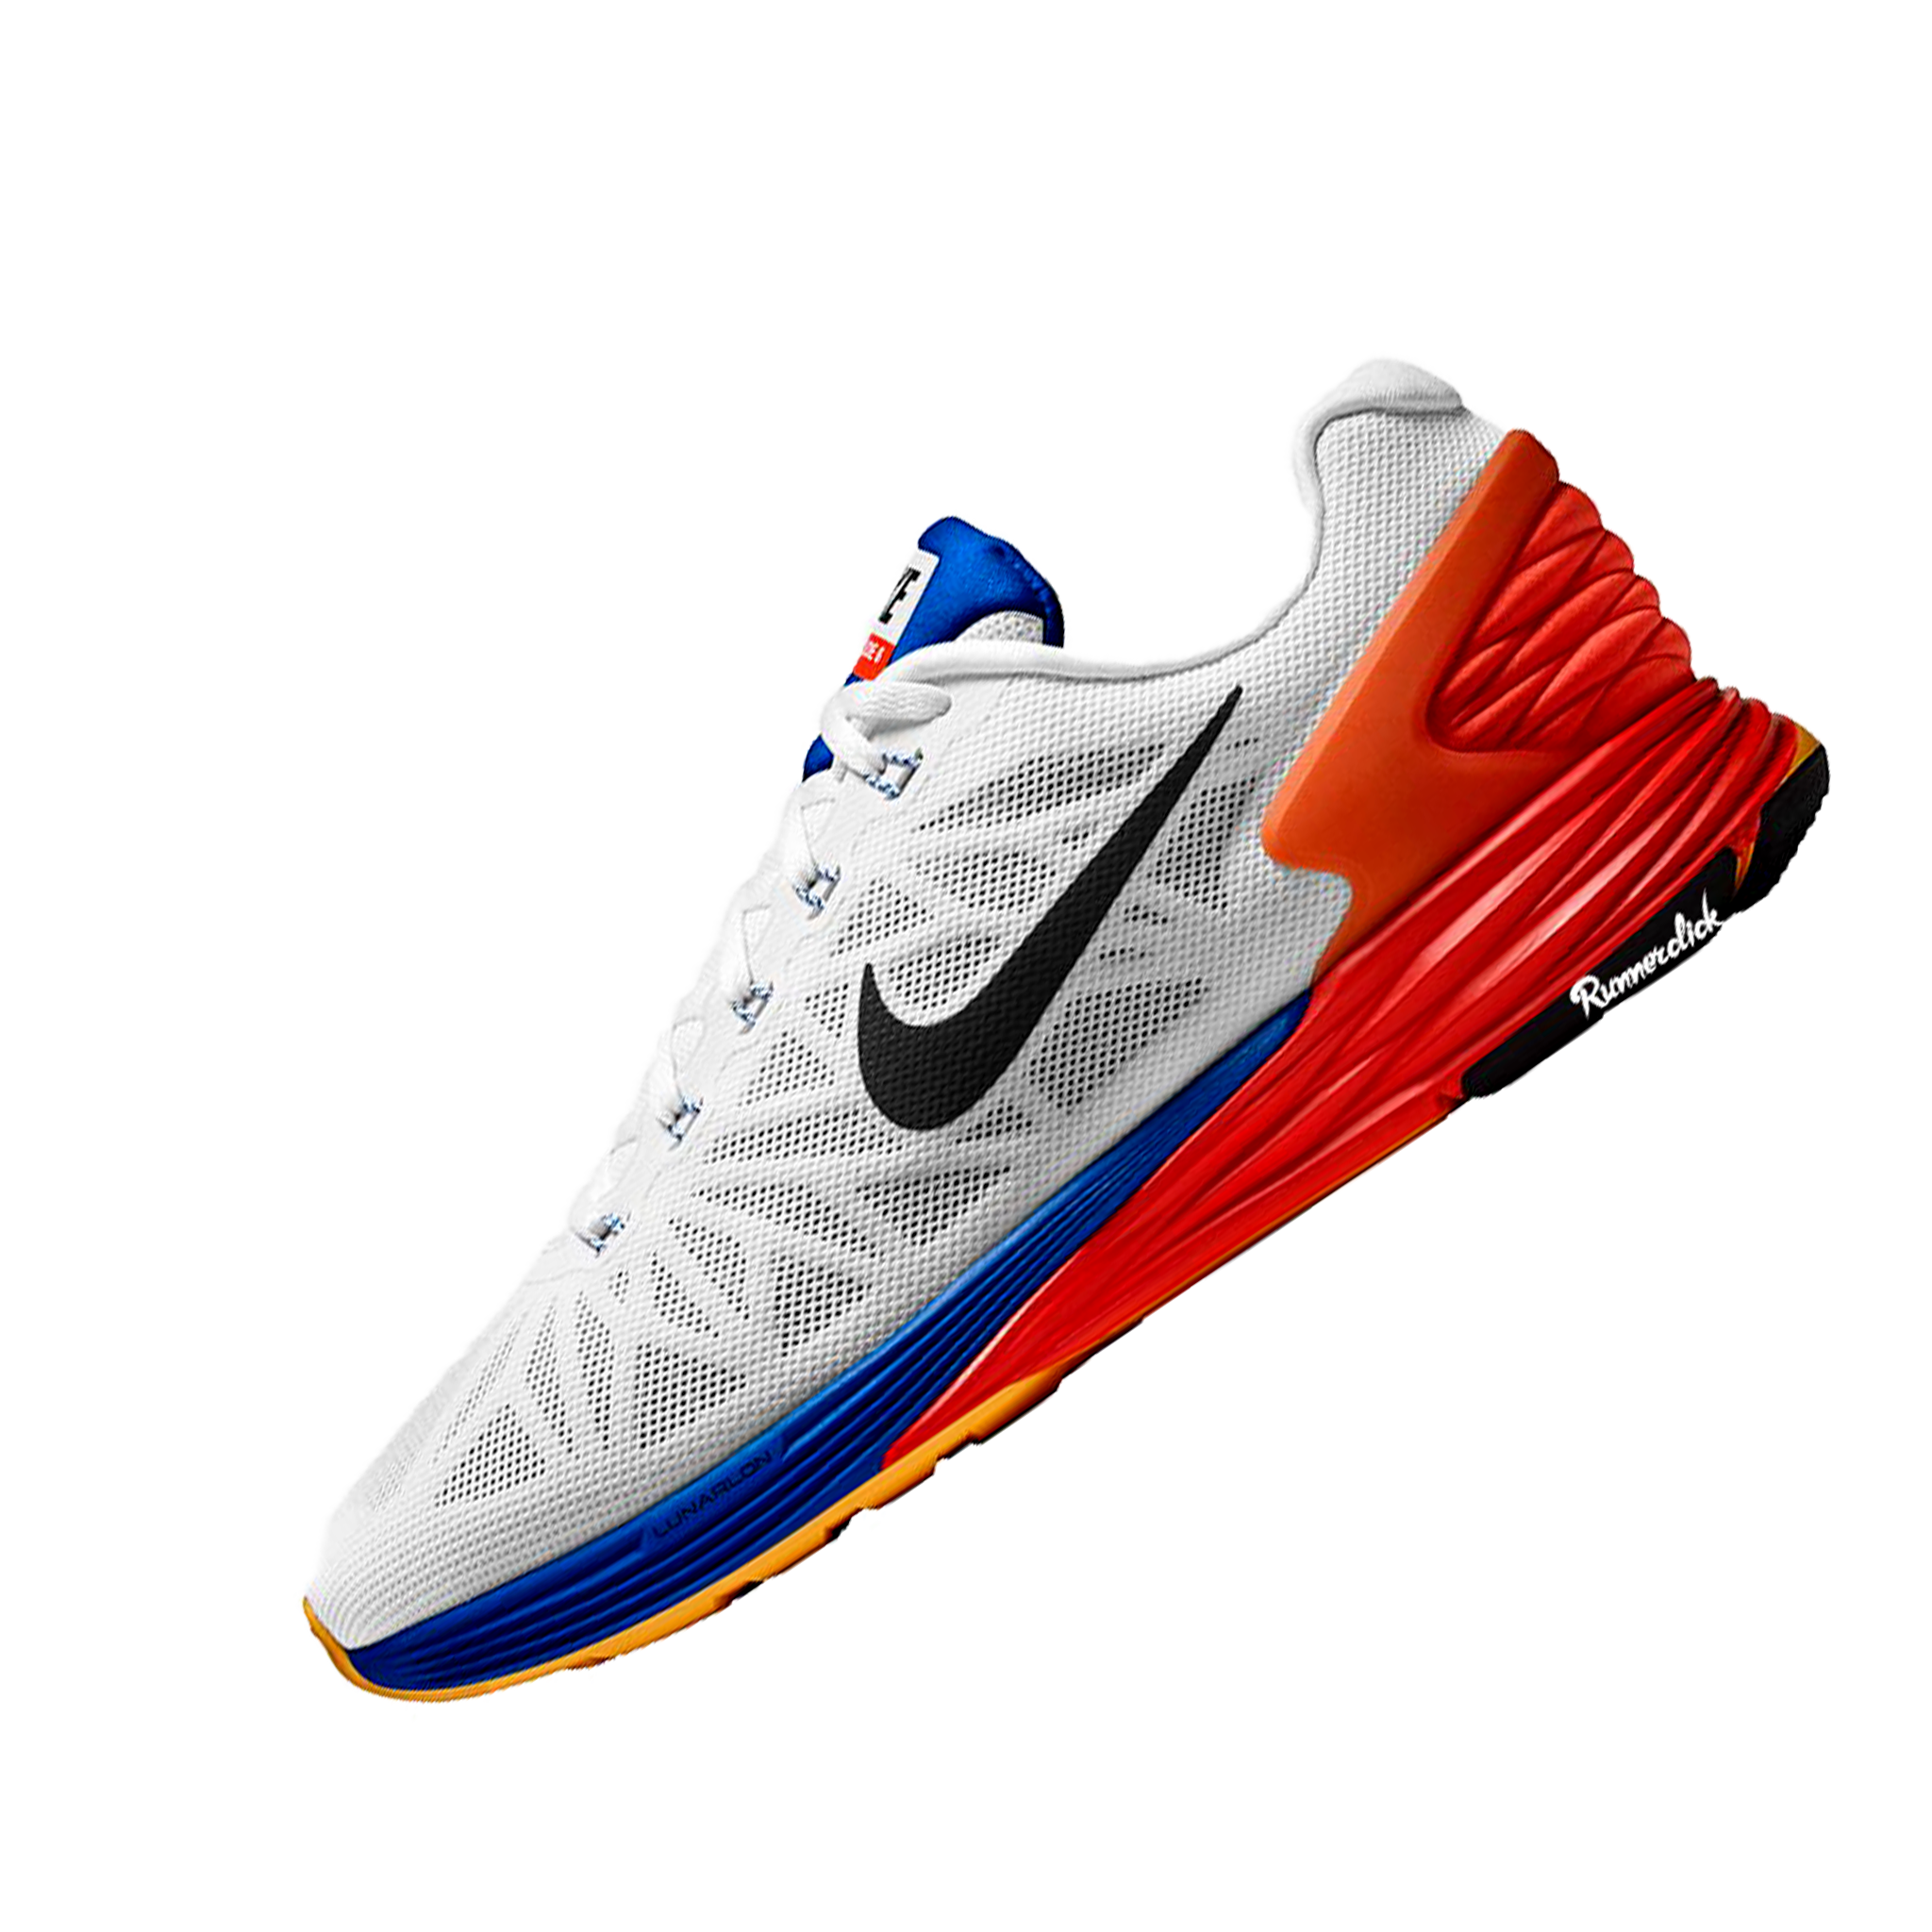 Nike Shoes Air Max PNG Images